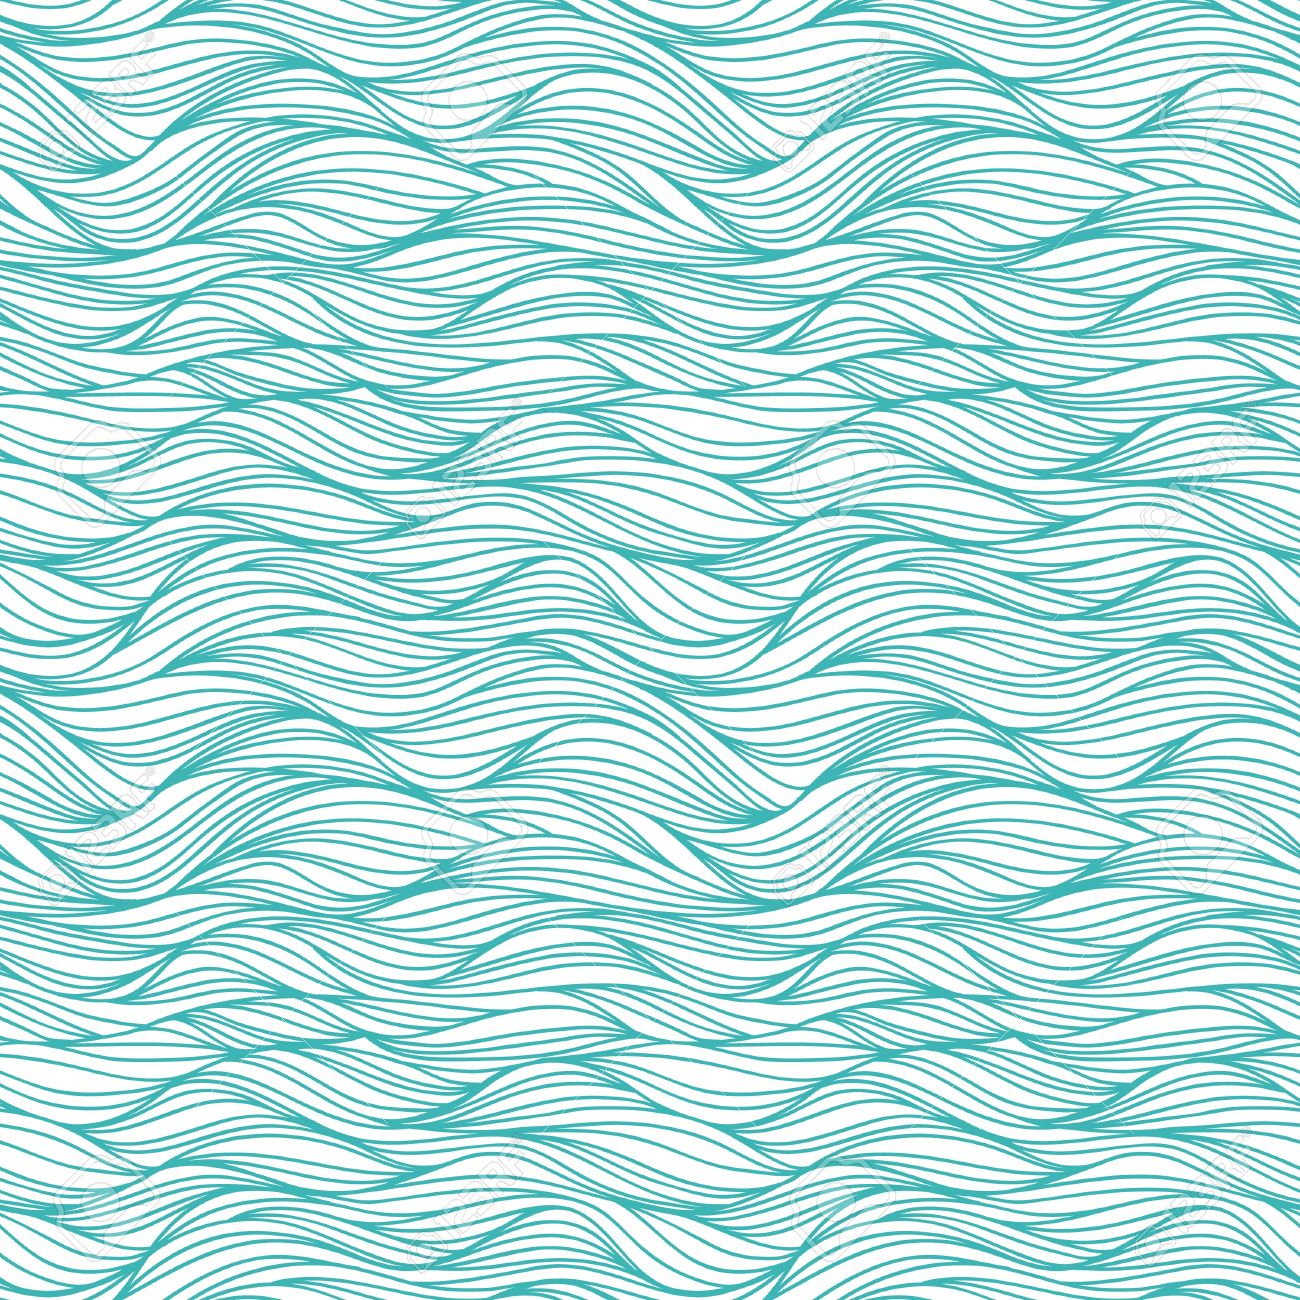 Wave Pattern Drawing at GetDrawings.com | Free for ...